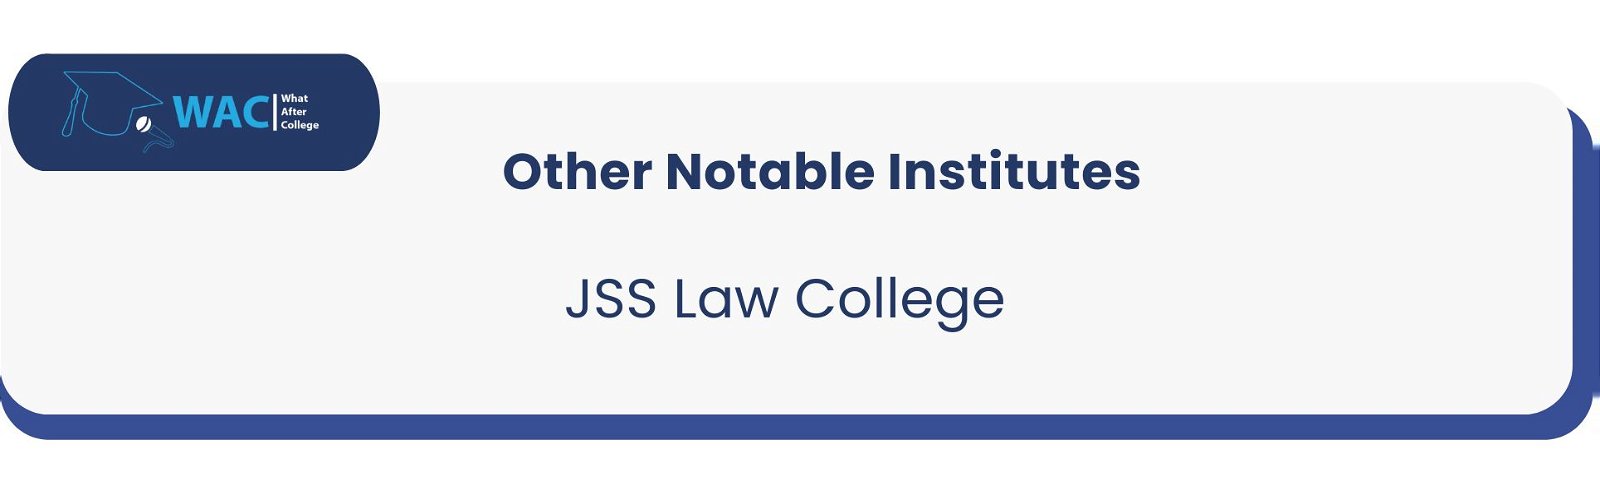 JSS Law College